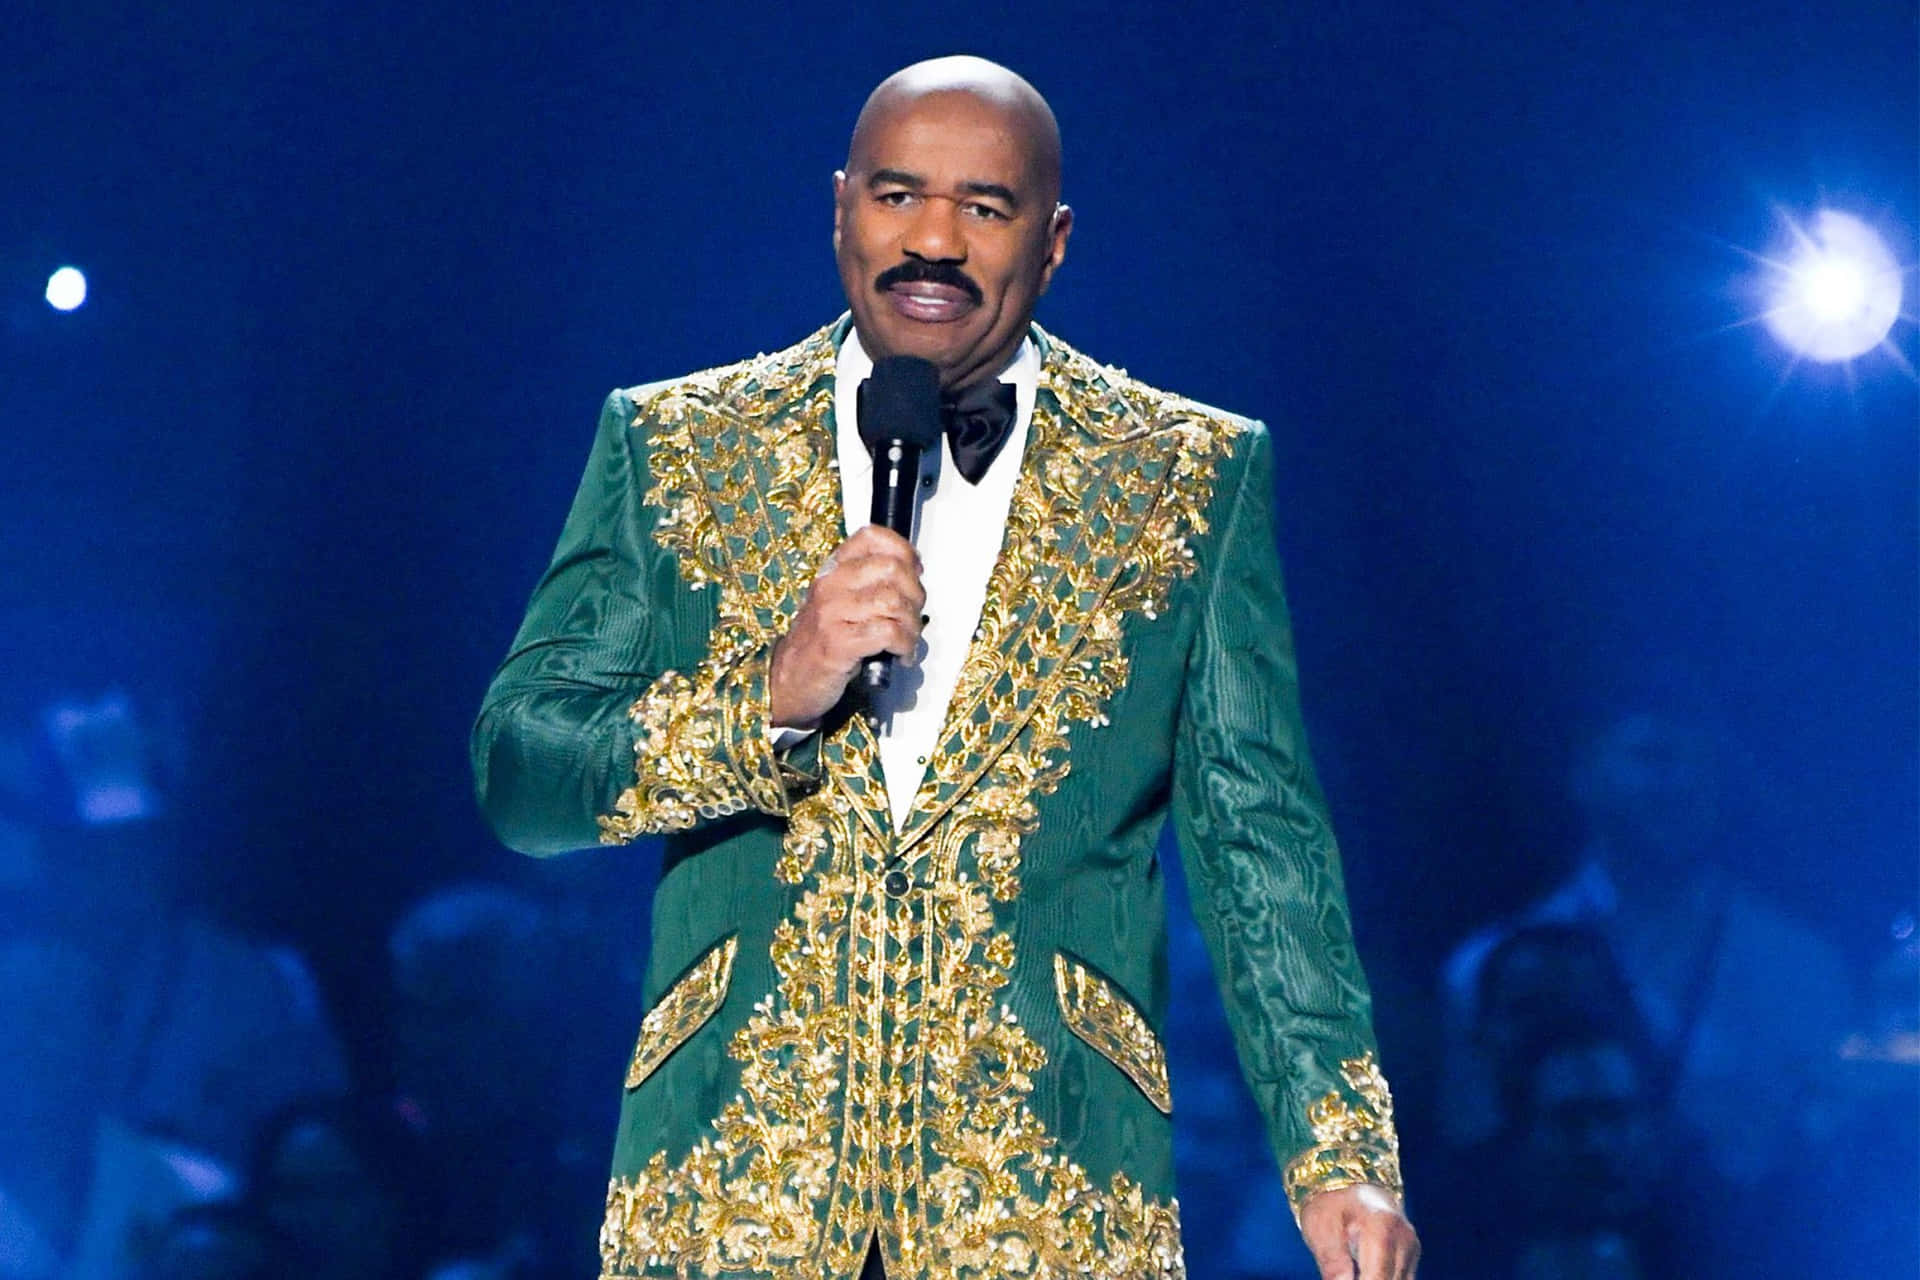 Steve Harvey Hosting In Green And Gold Suit